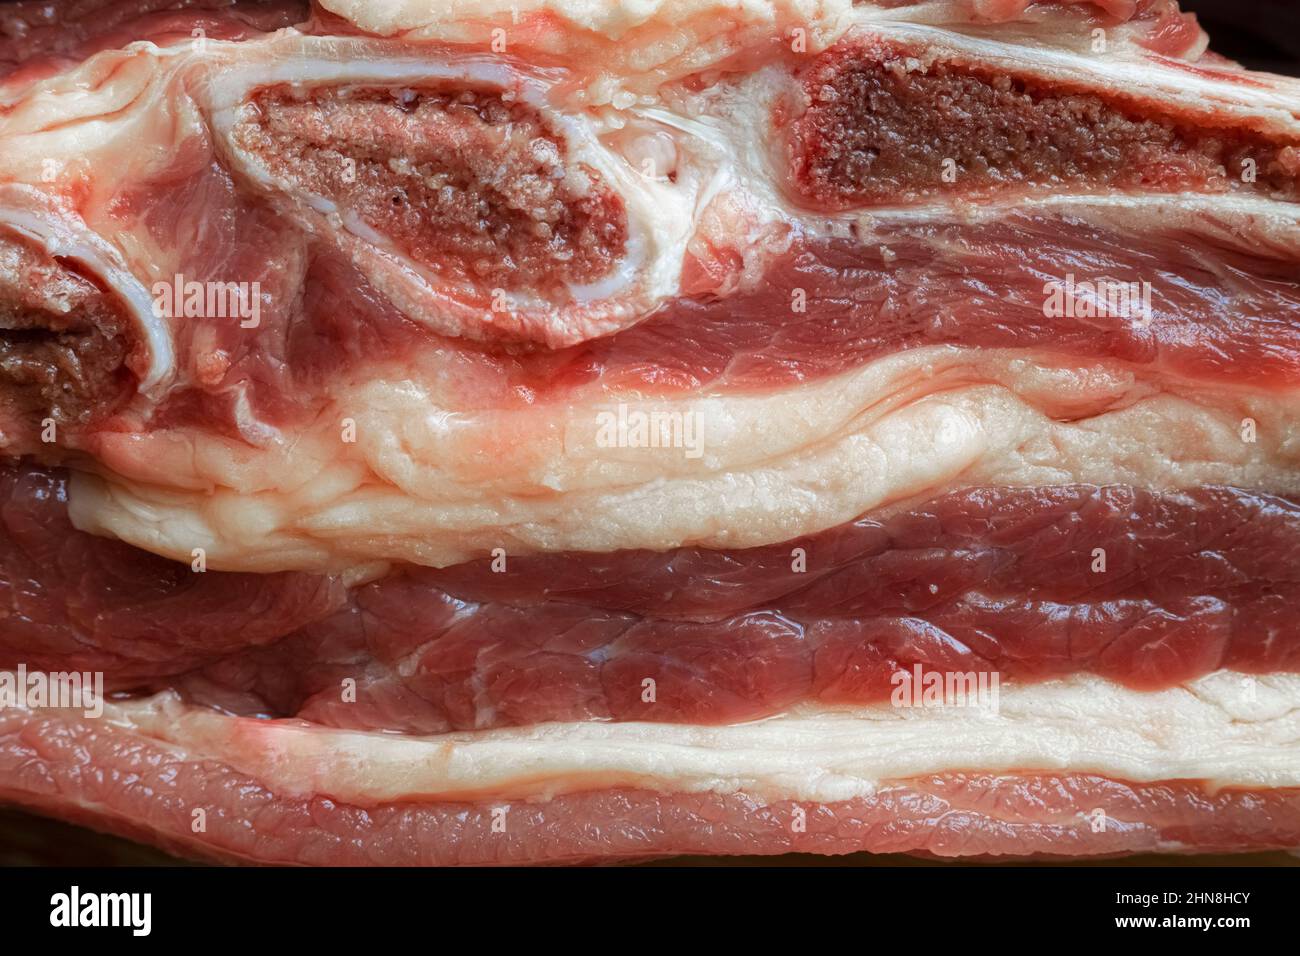 Large piece of beef with bones and fat close-up Stock Photo